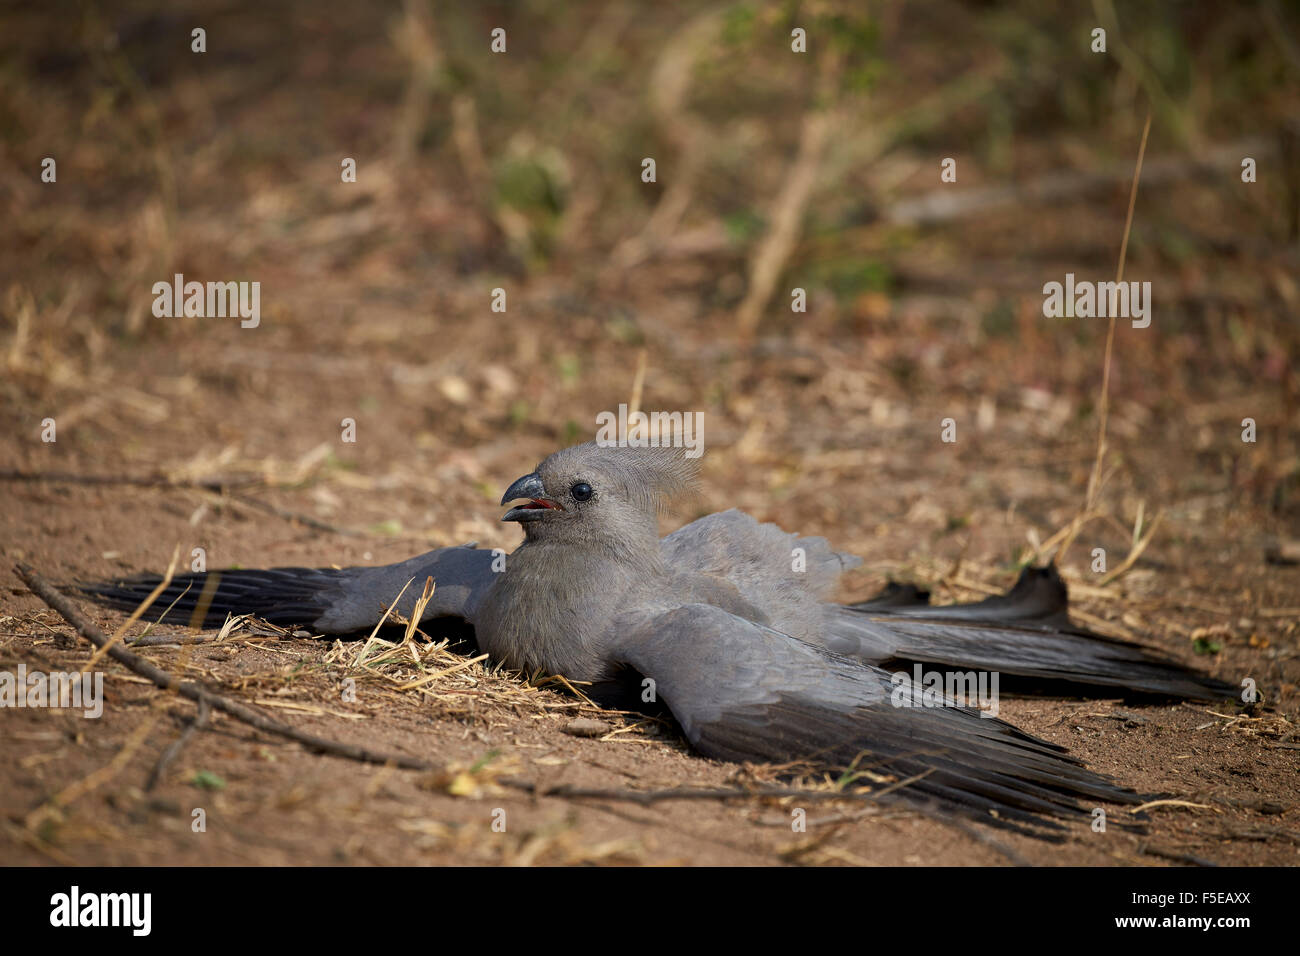 Grey lourie (go-away bird) (Corythaixoides concolor), Kruger National Park, South Africa, Africa Stock Photo